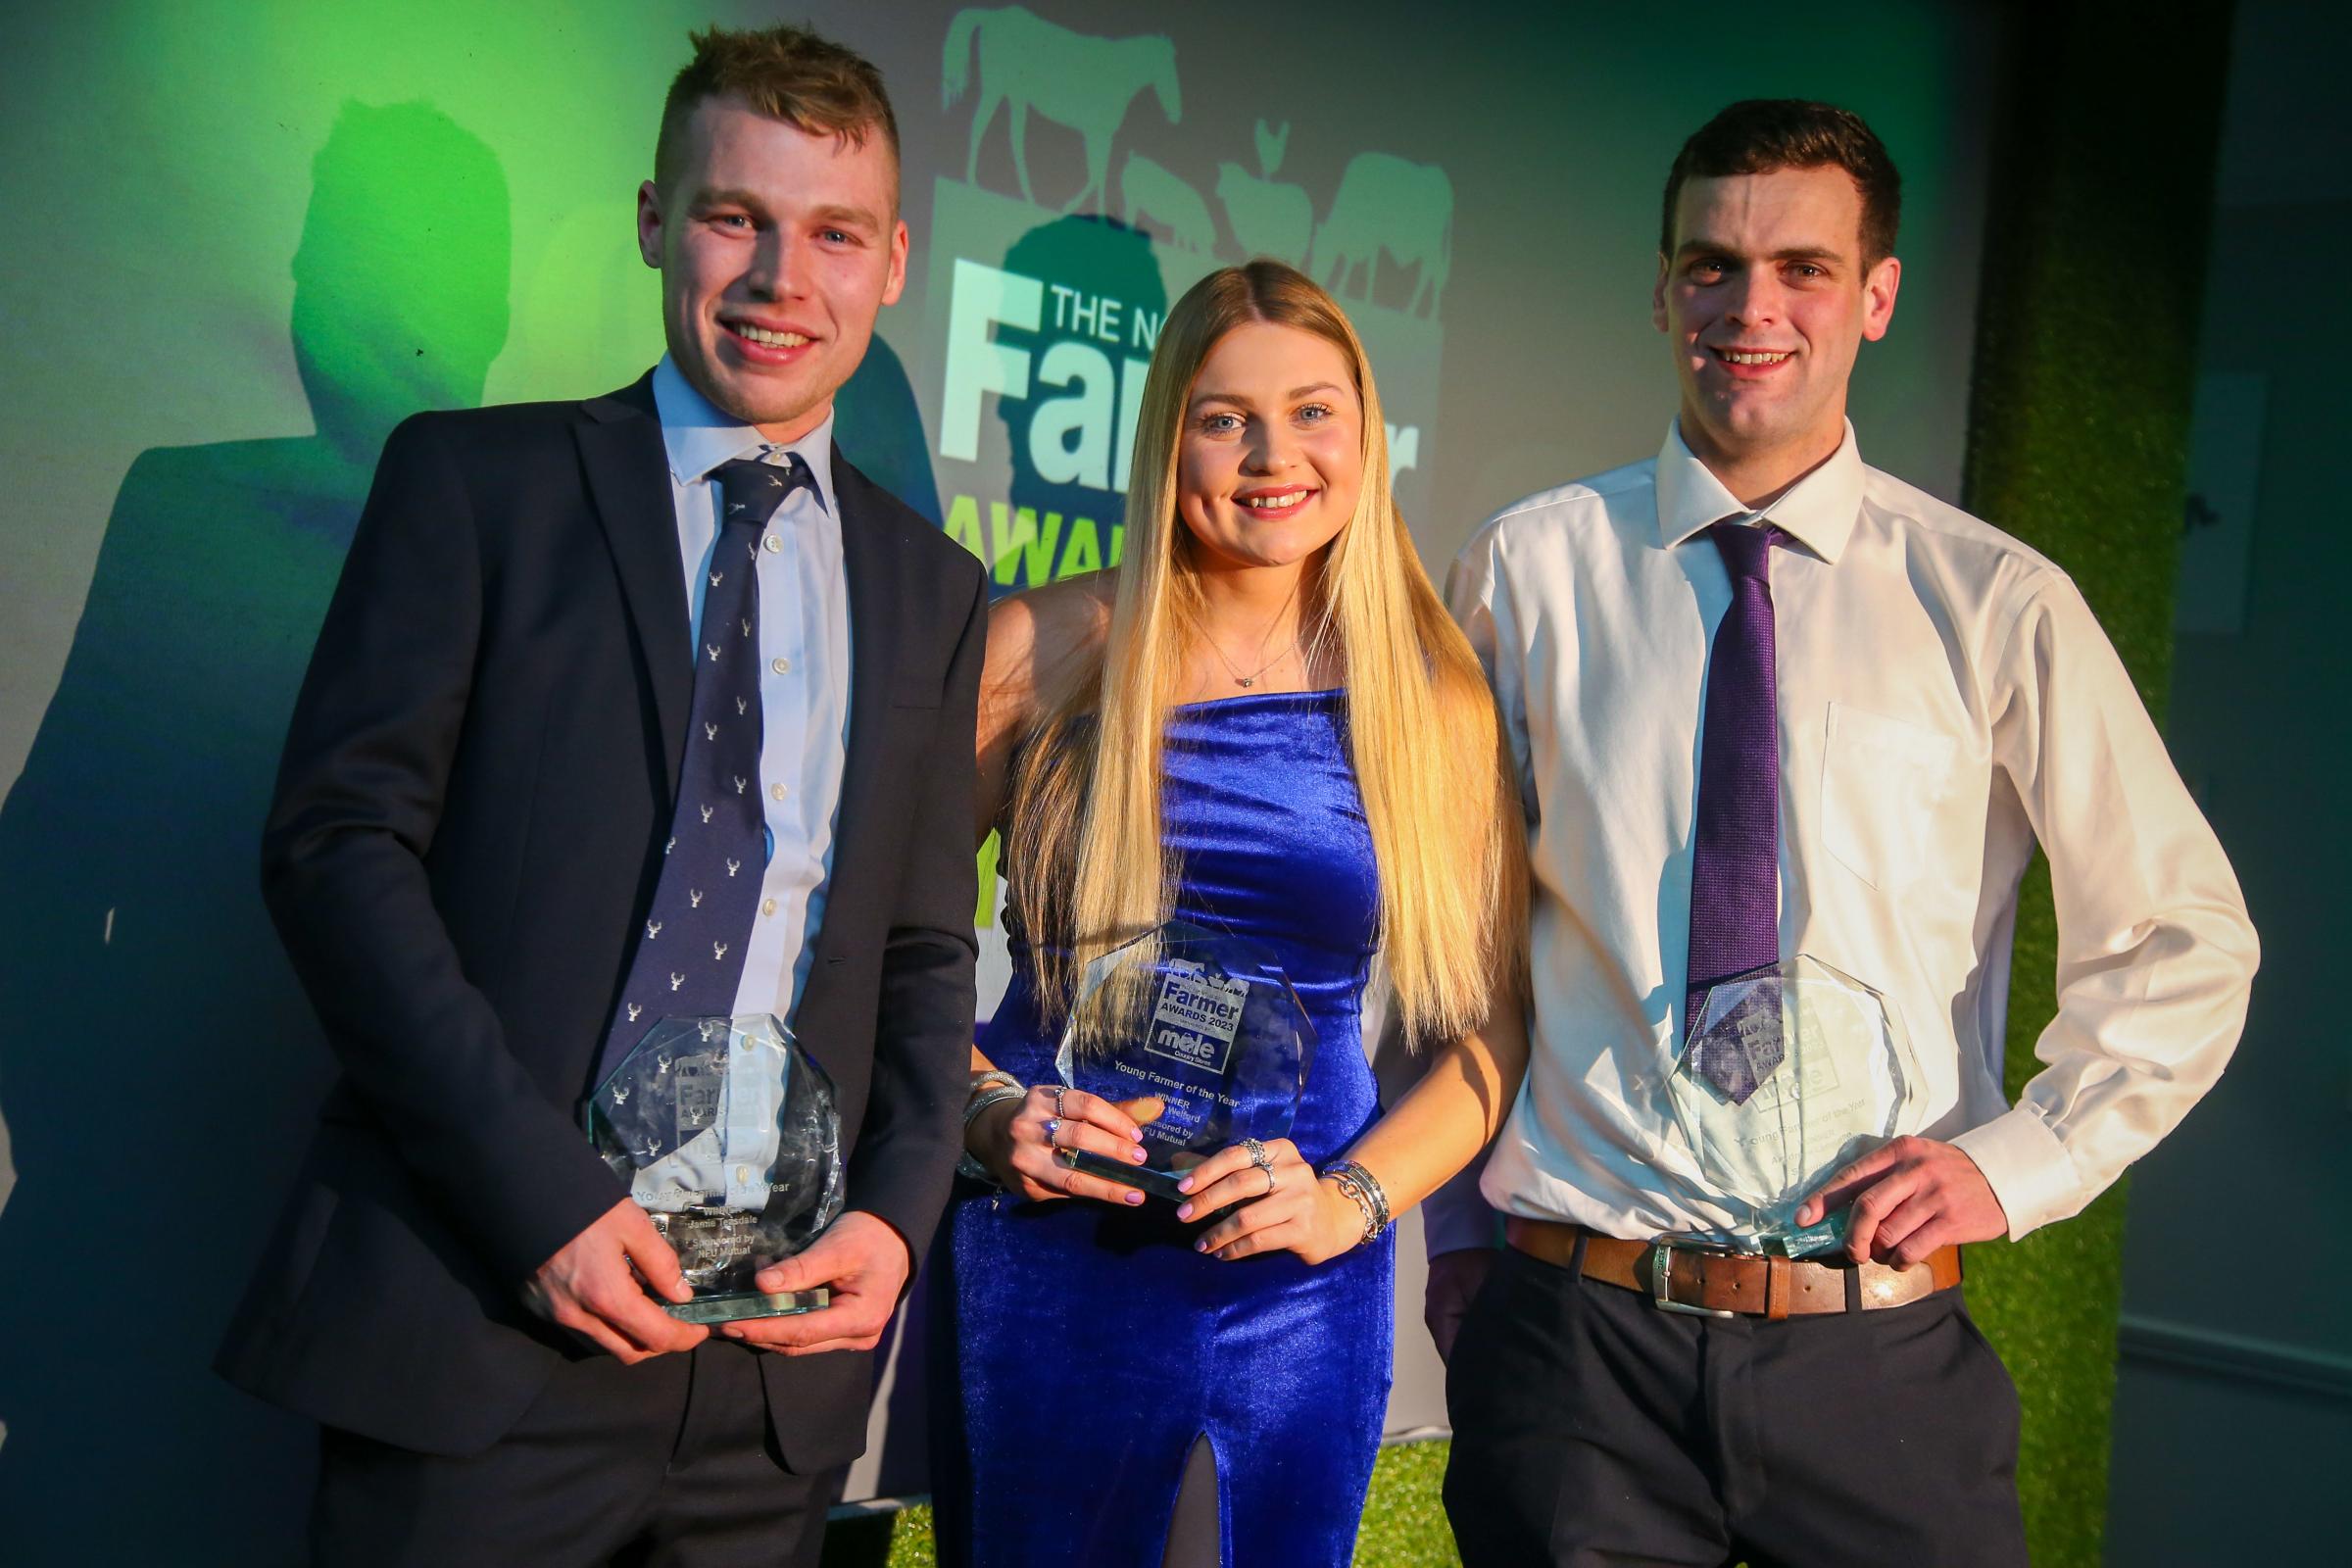 The 2023 Northern Farmer Awards at Pavillions of Harrogate. Young Farmer of the Year Award - Maddy Welford, Jamie Teasdale, Andrew Langthorne. Presented by Kevin Braithwaite of NFU Mutal. Picture by Tom Banks